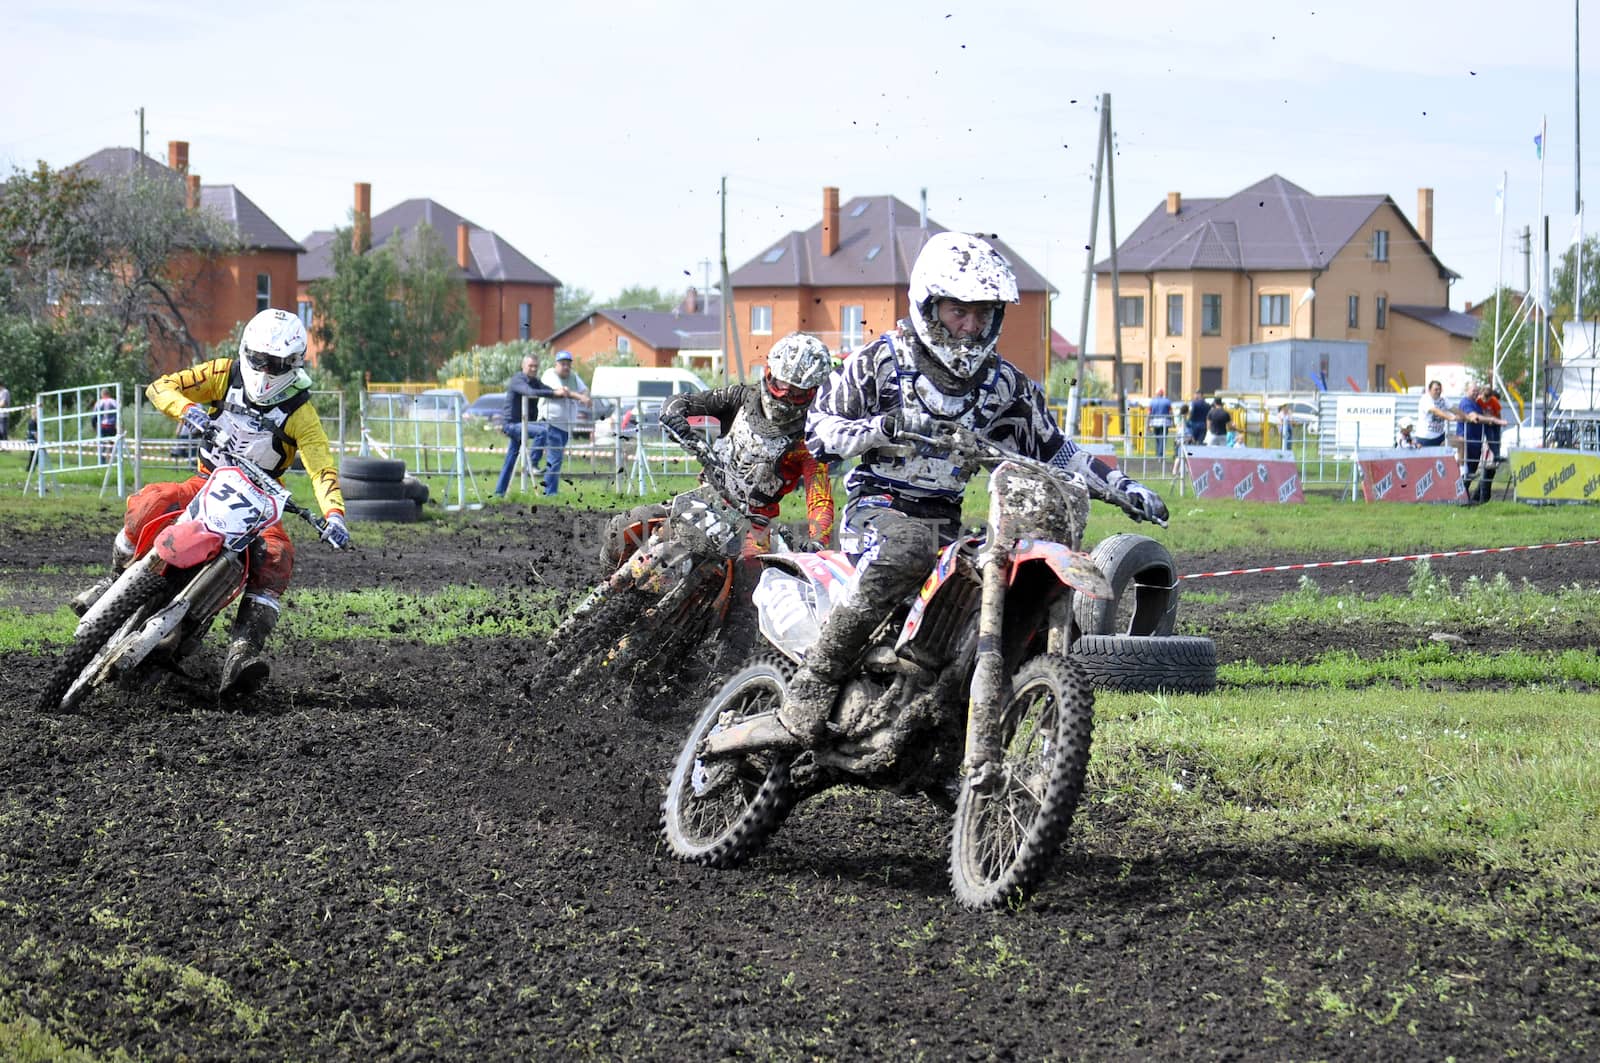 Motorcyclists on motorcycles participate in cross-country race. by veronka72